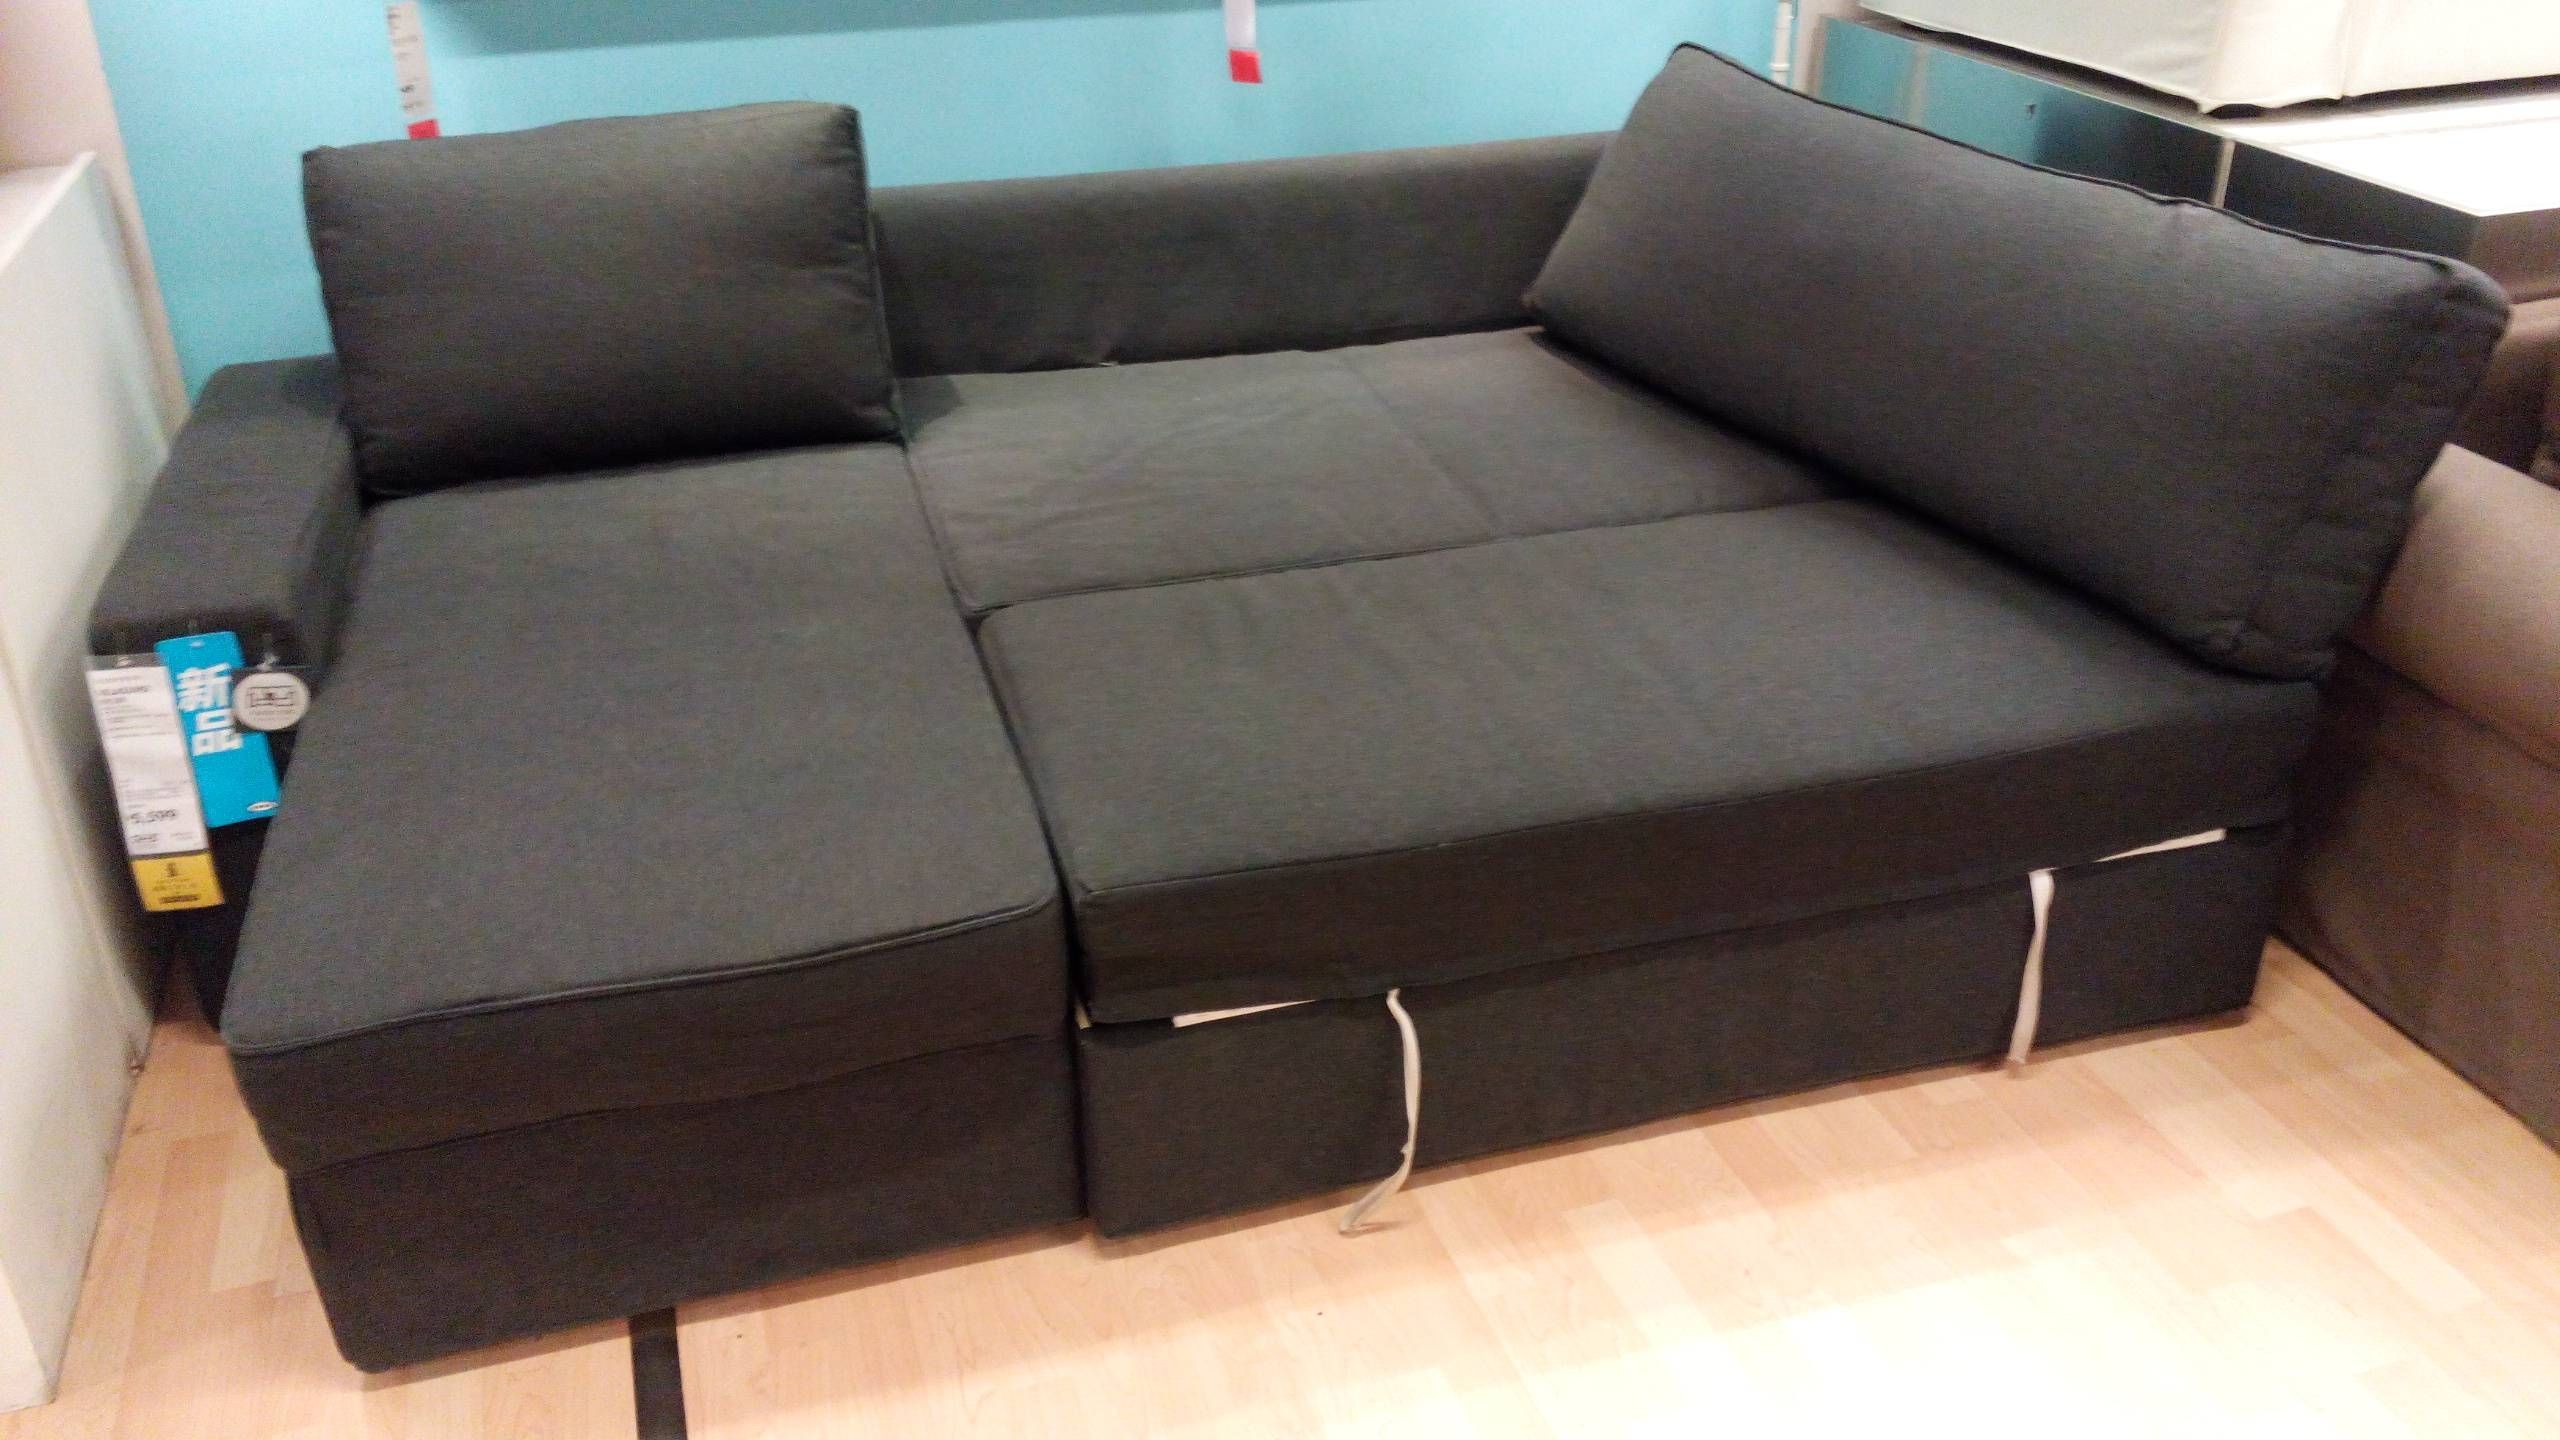 Ikea Vilasund And Backabro Review – Return Of The Sofa Bed Clones! Throughout Sofa Chairs Ikea (View 29 of 30)